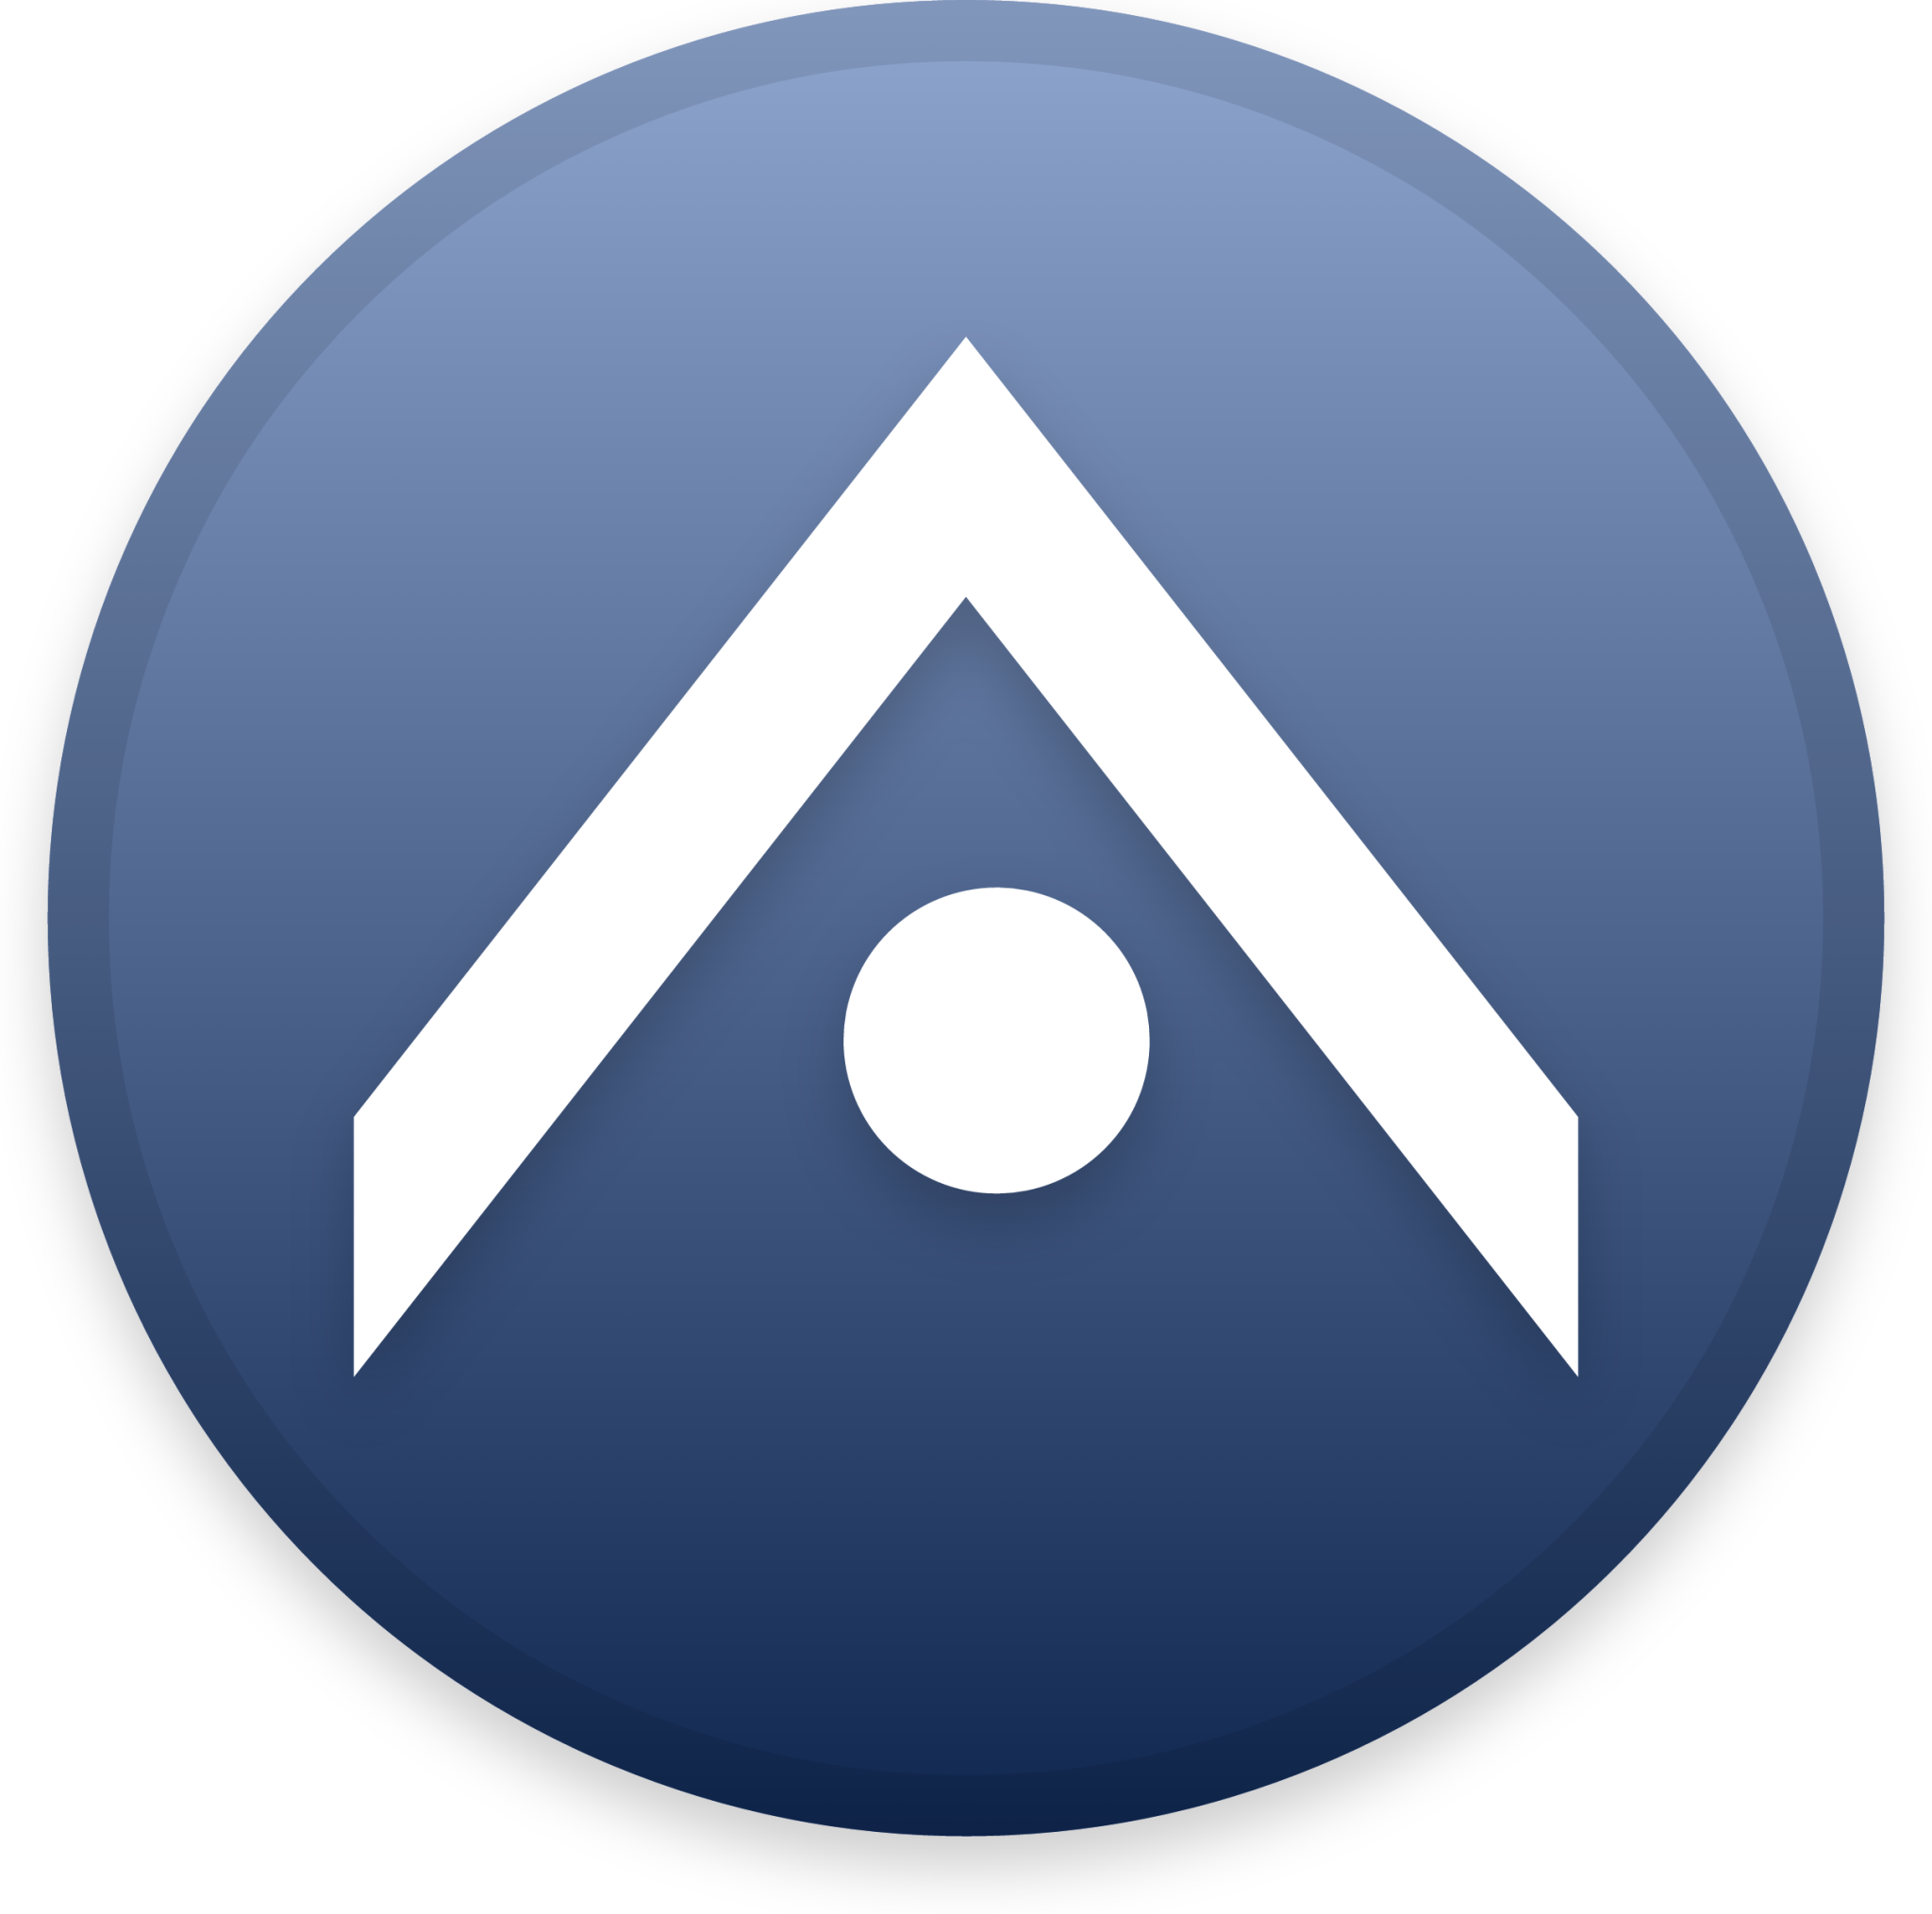 APEX Cryptocurrency icon